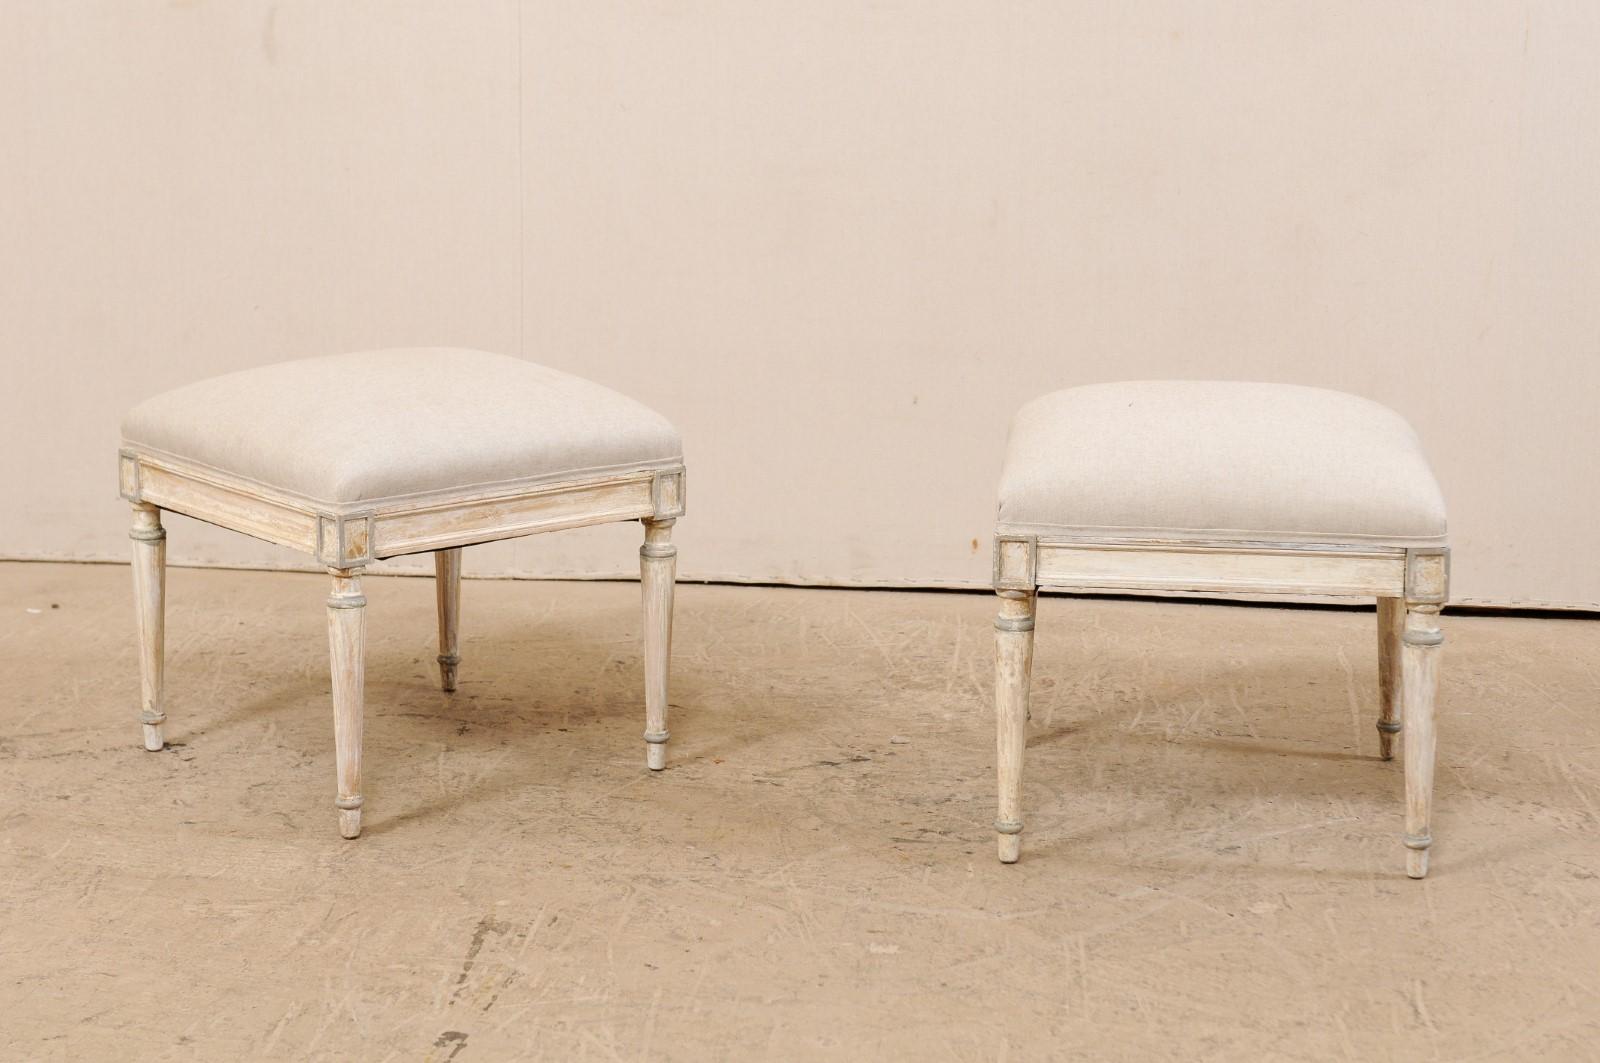 A pair of French wooden stools with upholstered seats from the early 20th century. This antique pair of French stools each feature straight skirts, carved rectangular outline shapes atop each knee, and are presented upon four rounded and gently